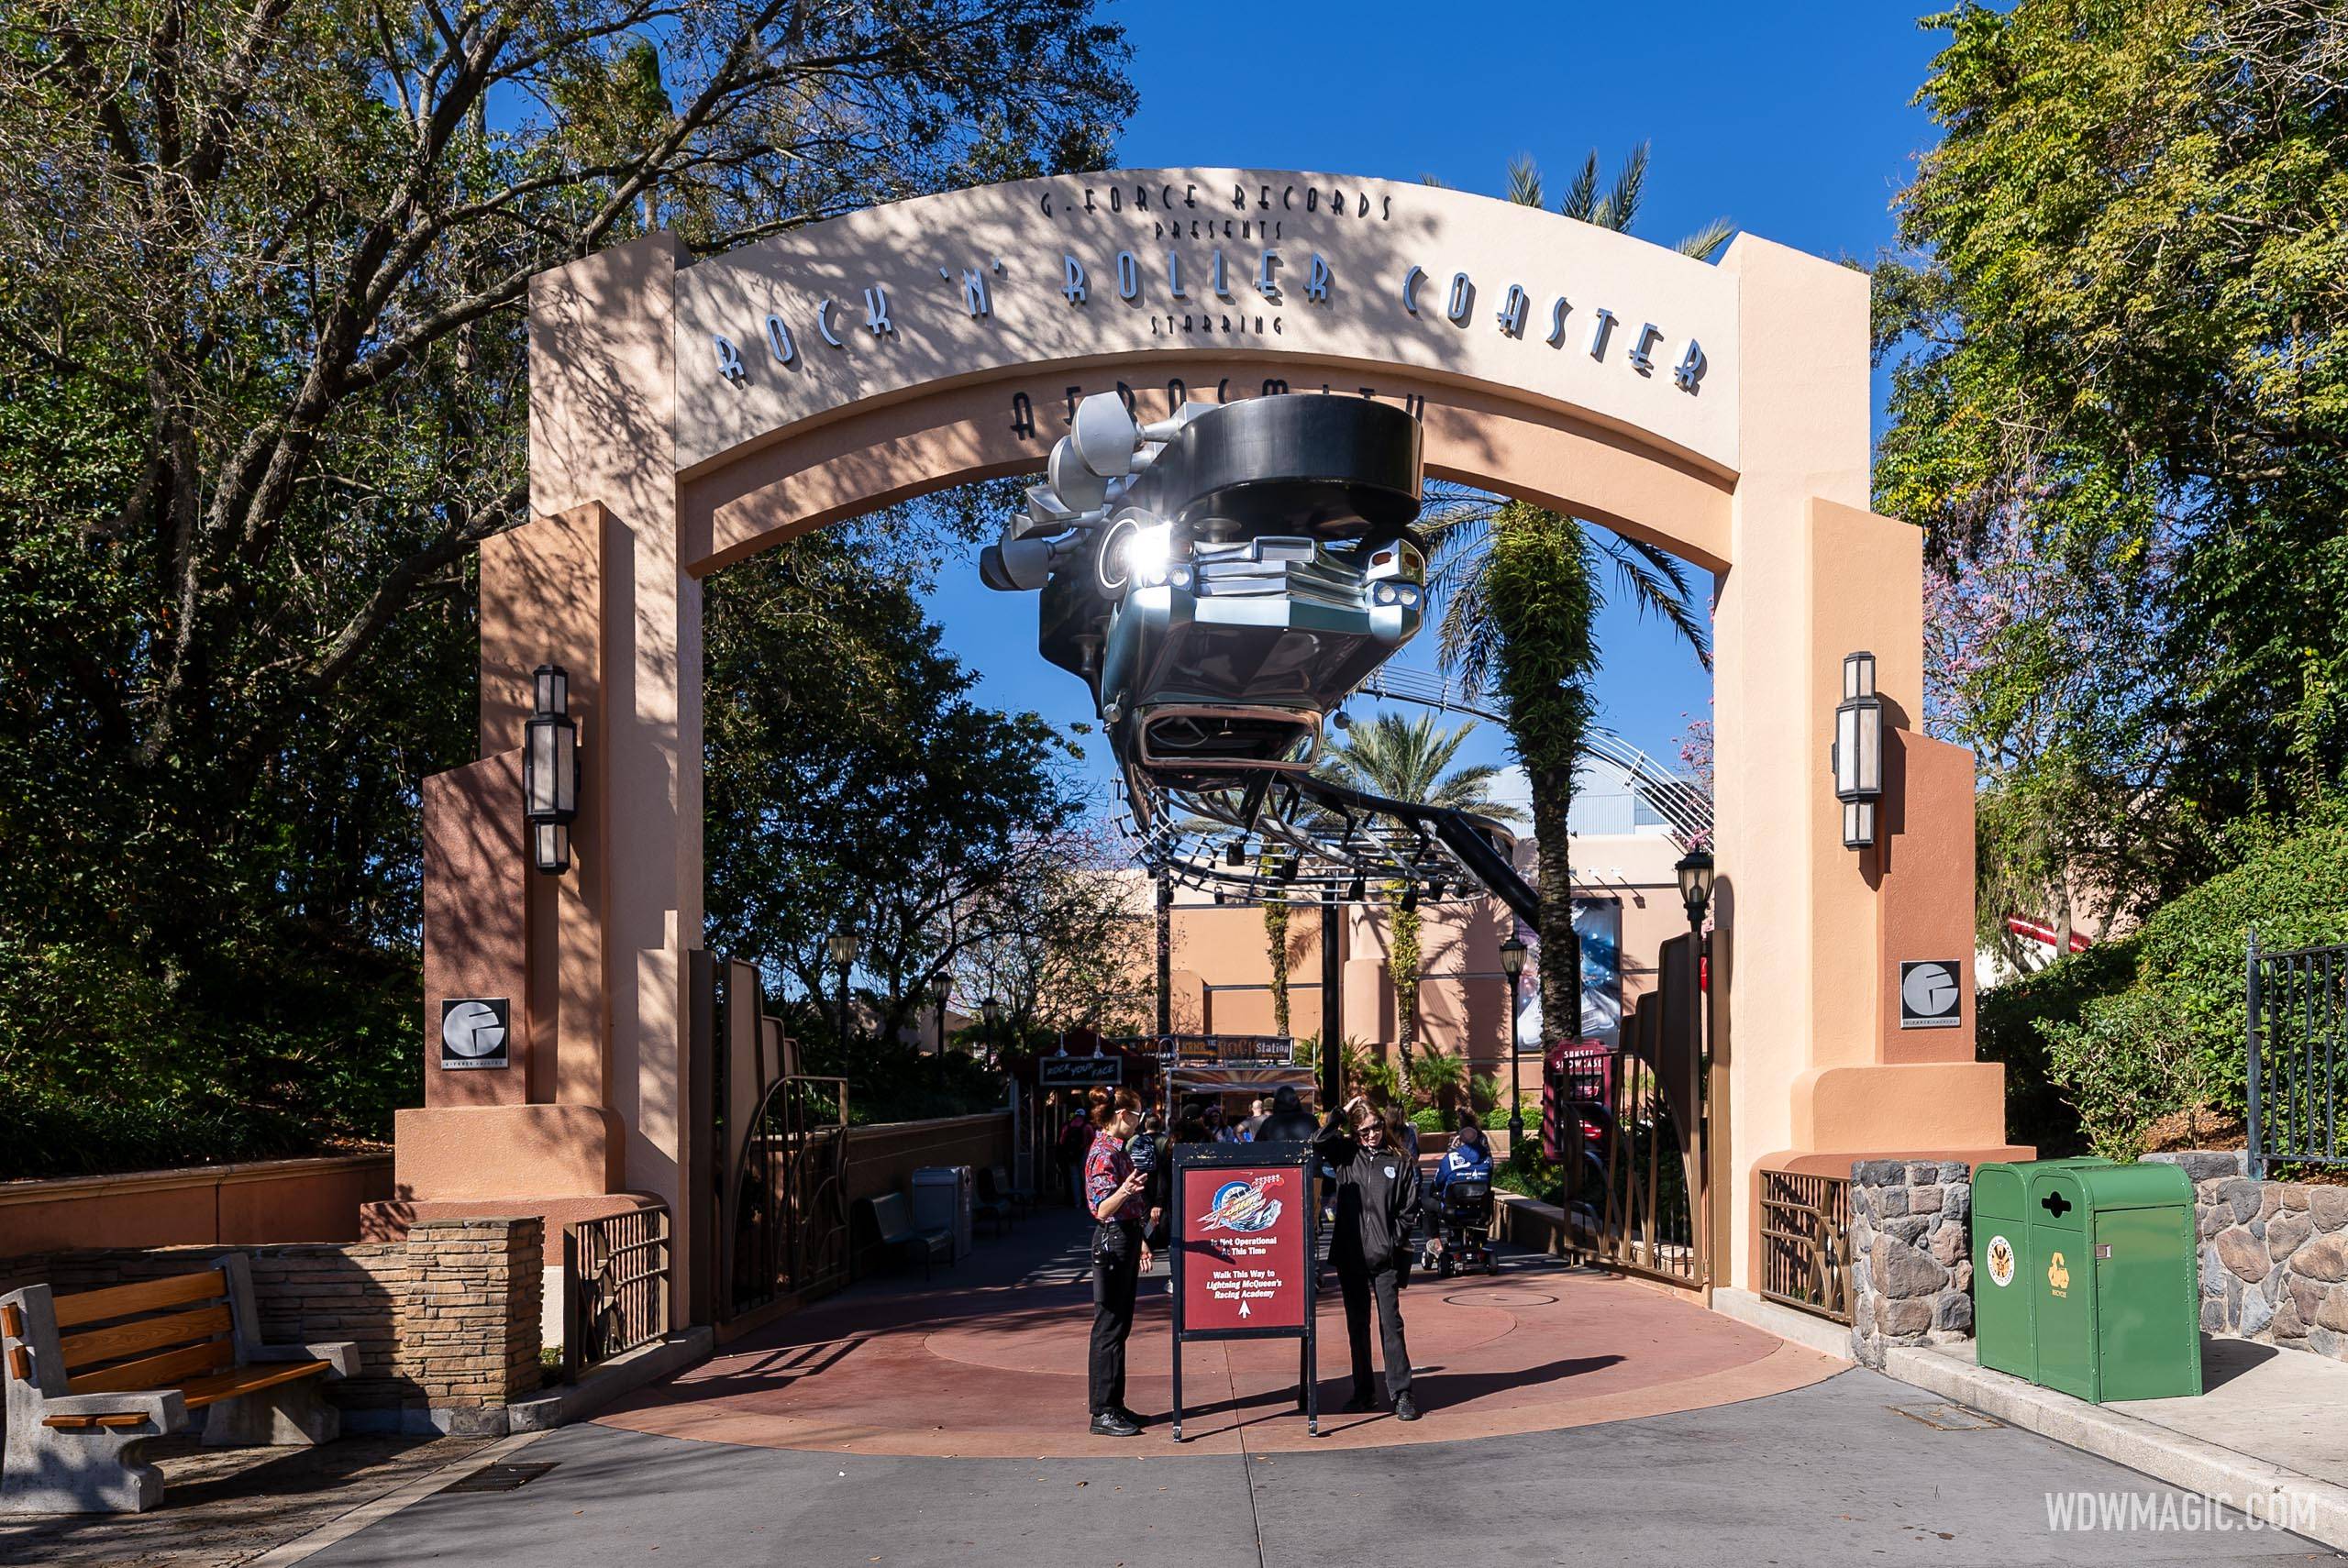 Rock' 'n Roller Coaster closed to begin its refurbishment on January 6, 2024